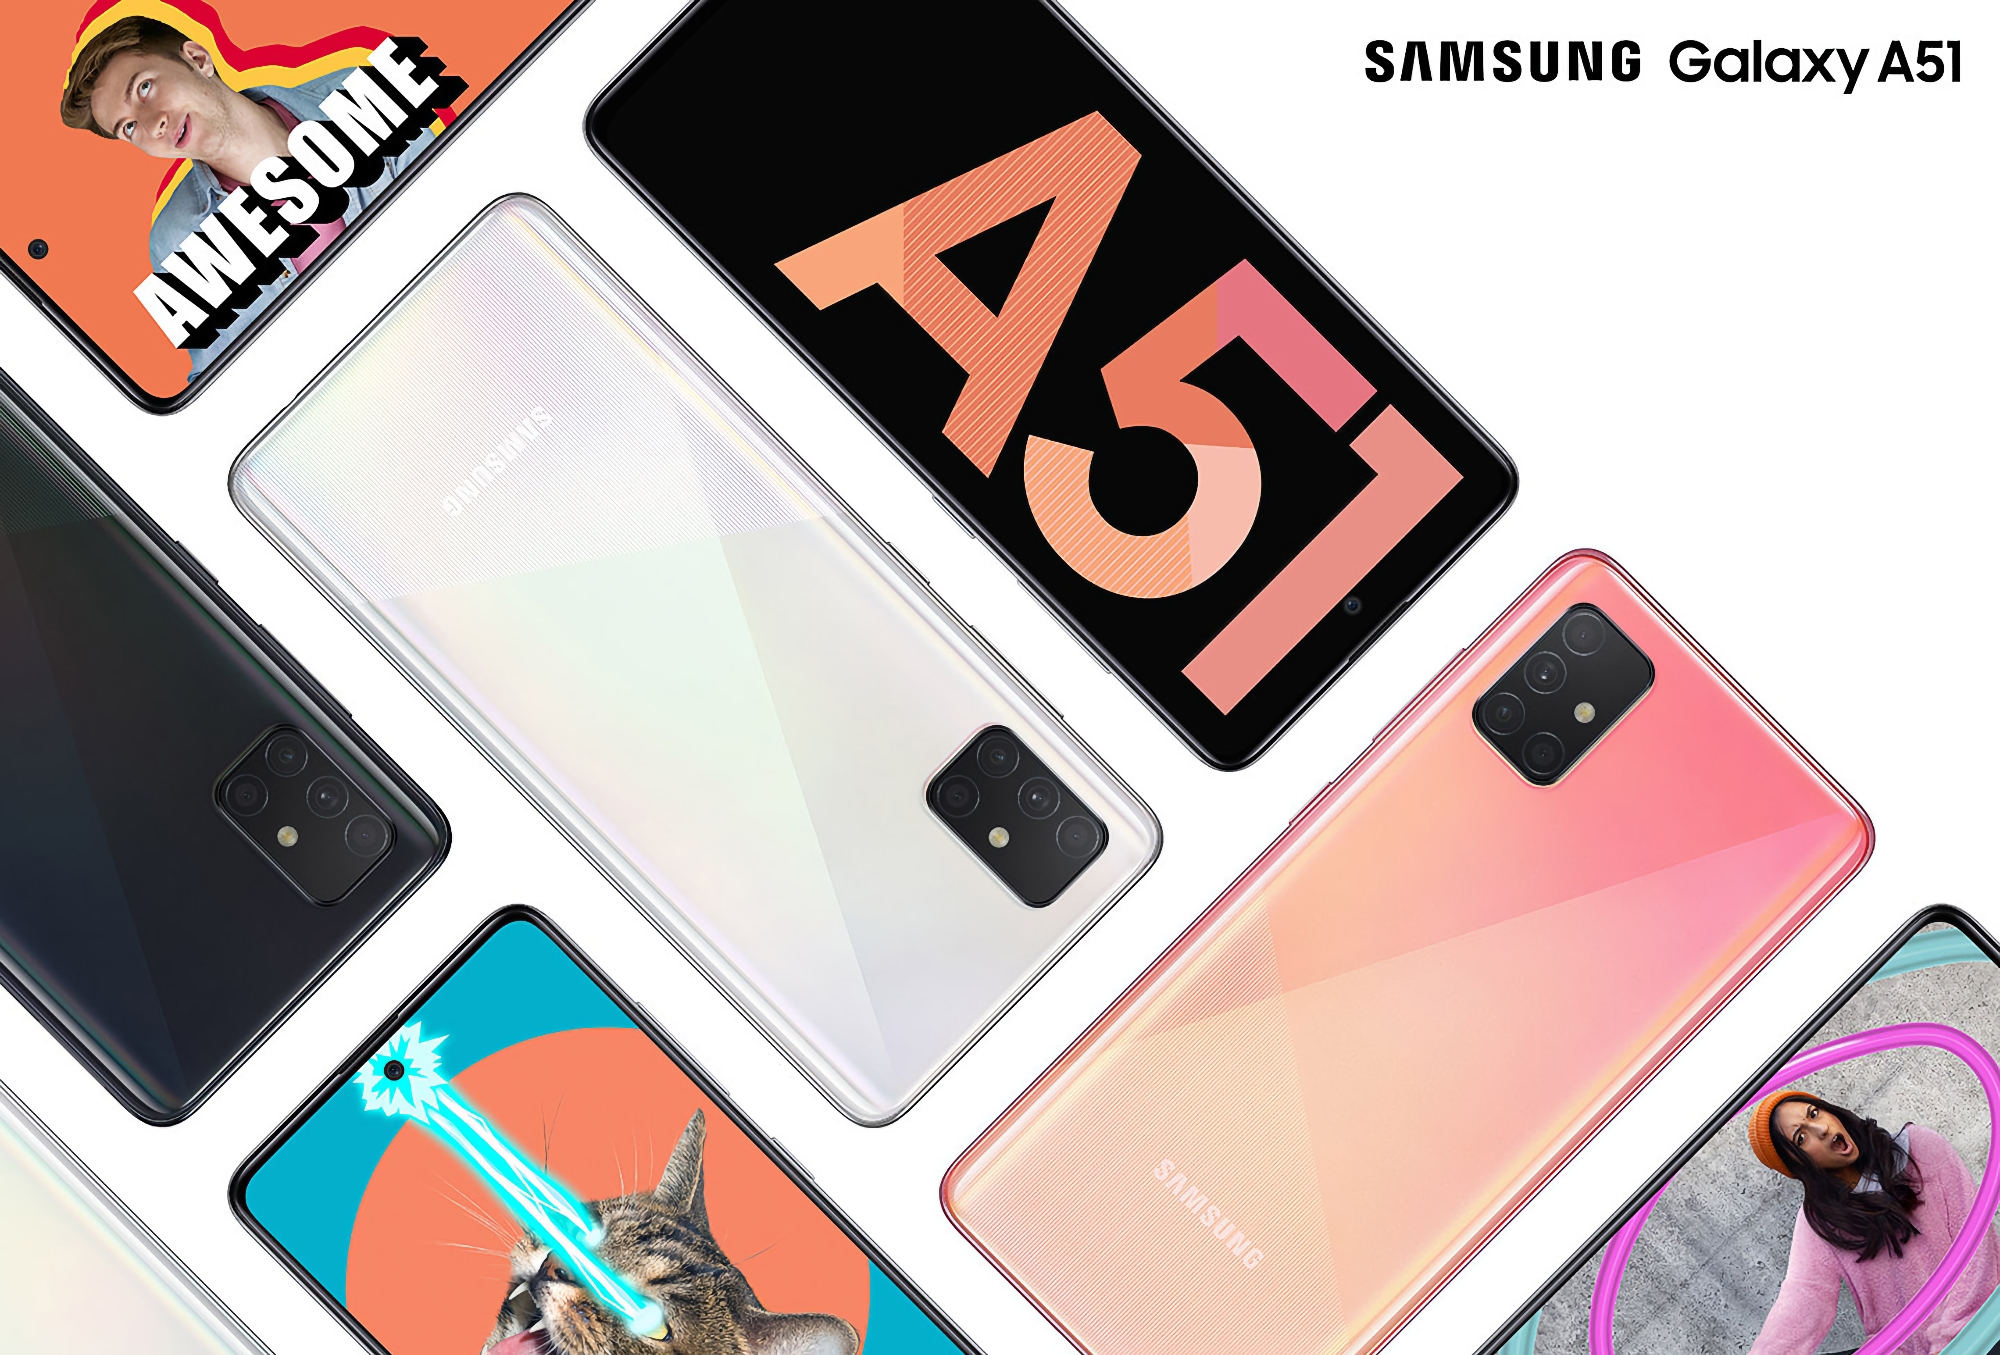 Samsung Galaxy A51 owners in Europe began receiving a major software update